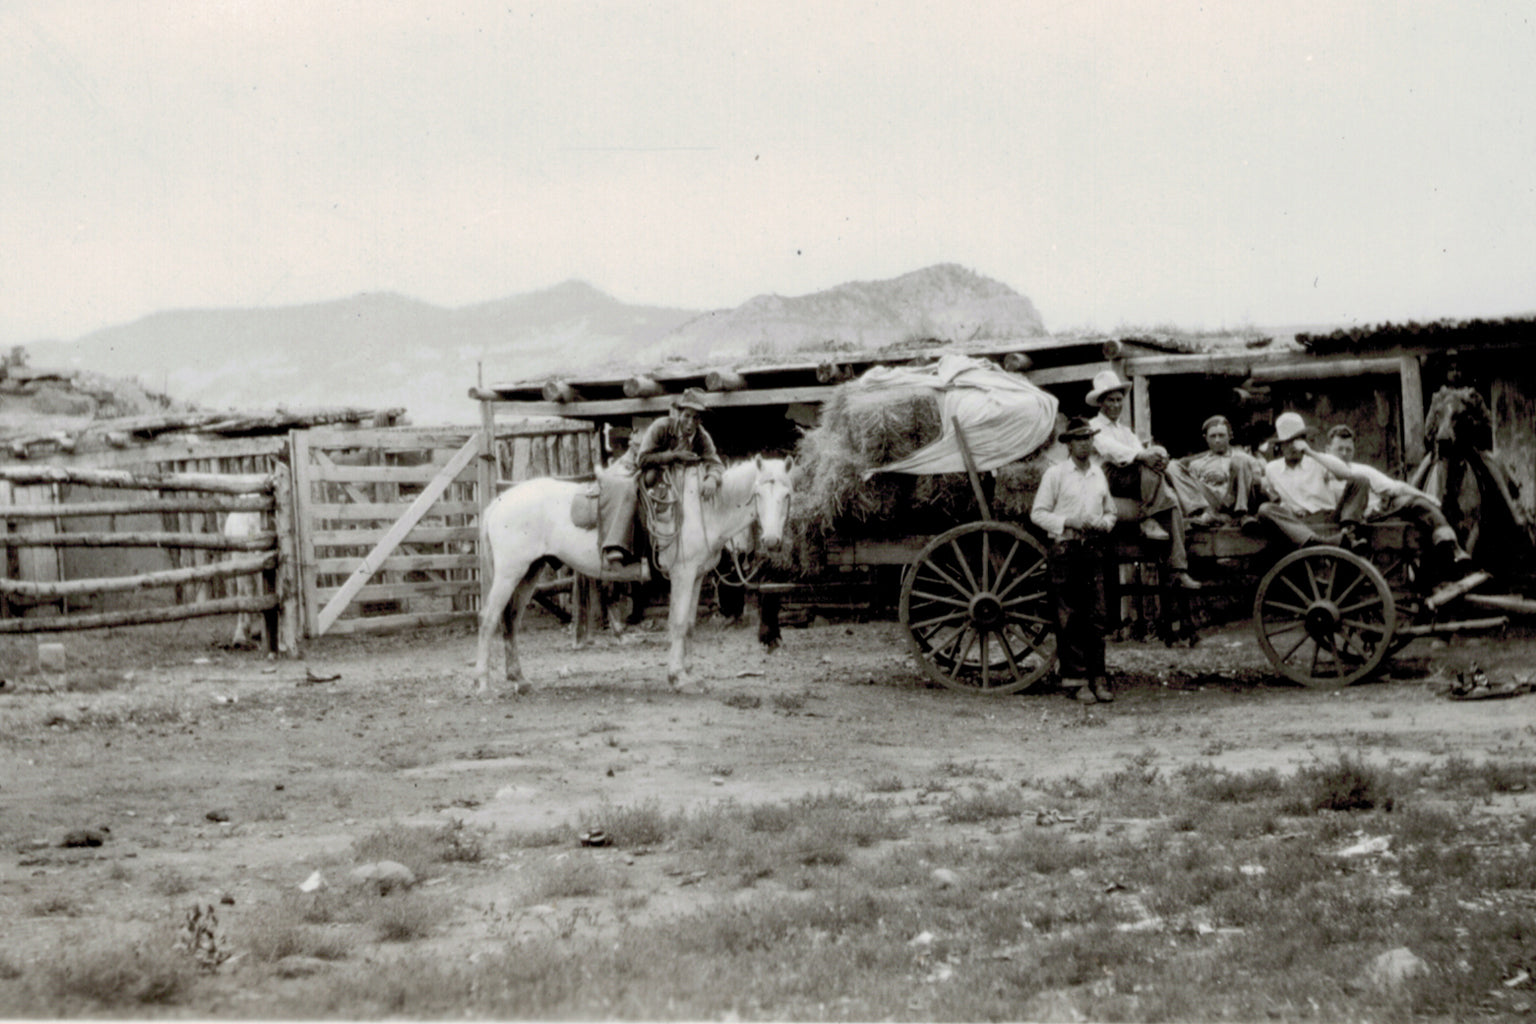 Hauling Hay Back in the Day